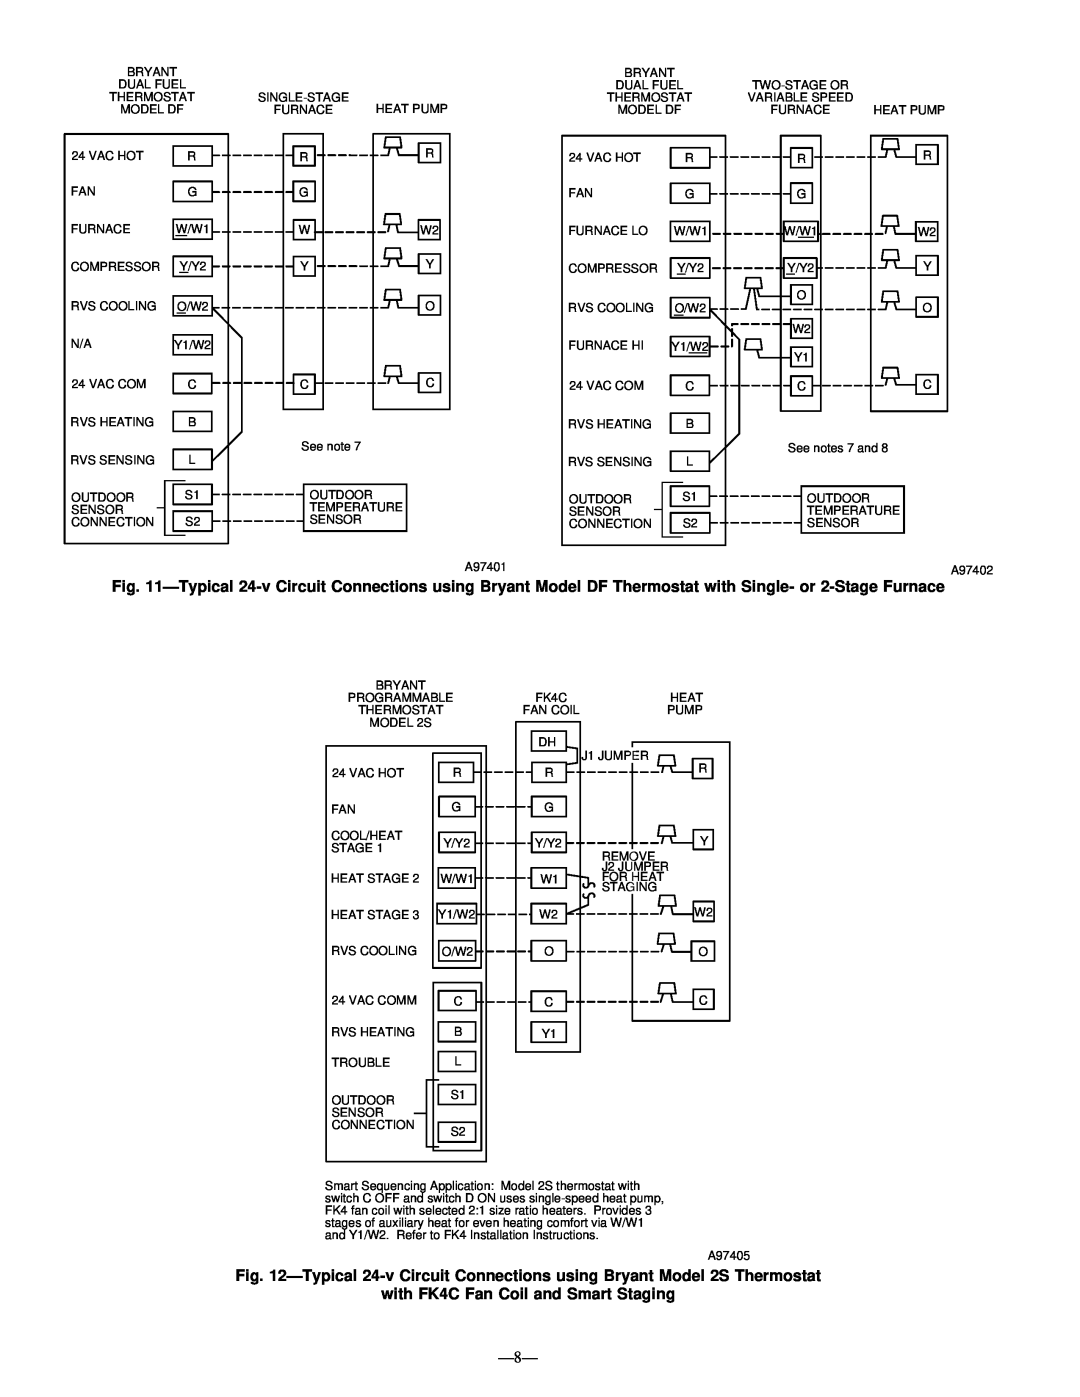 Bryant 663C instruction manual with FK4C Fan Coil and Smart Staging 